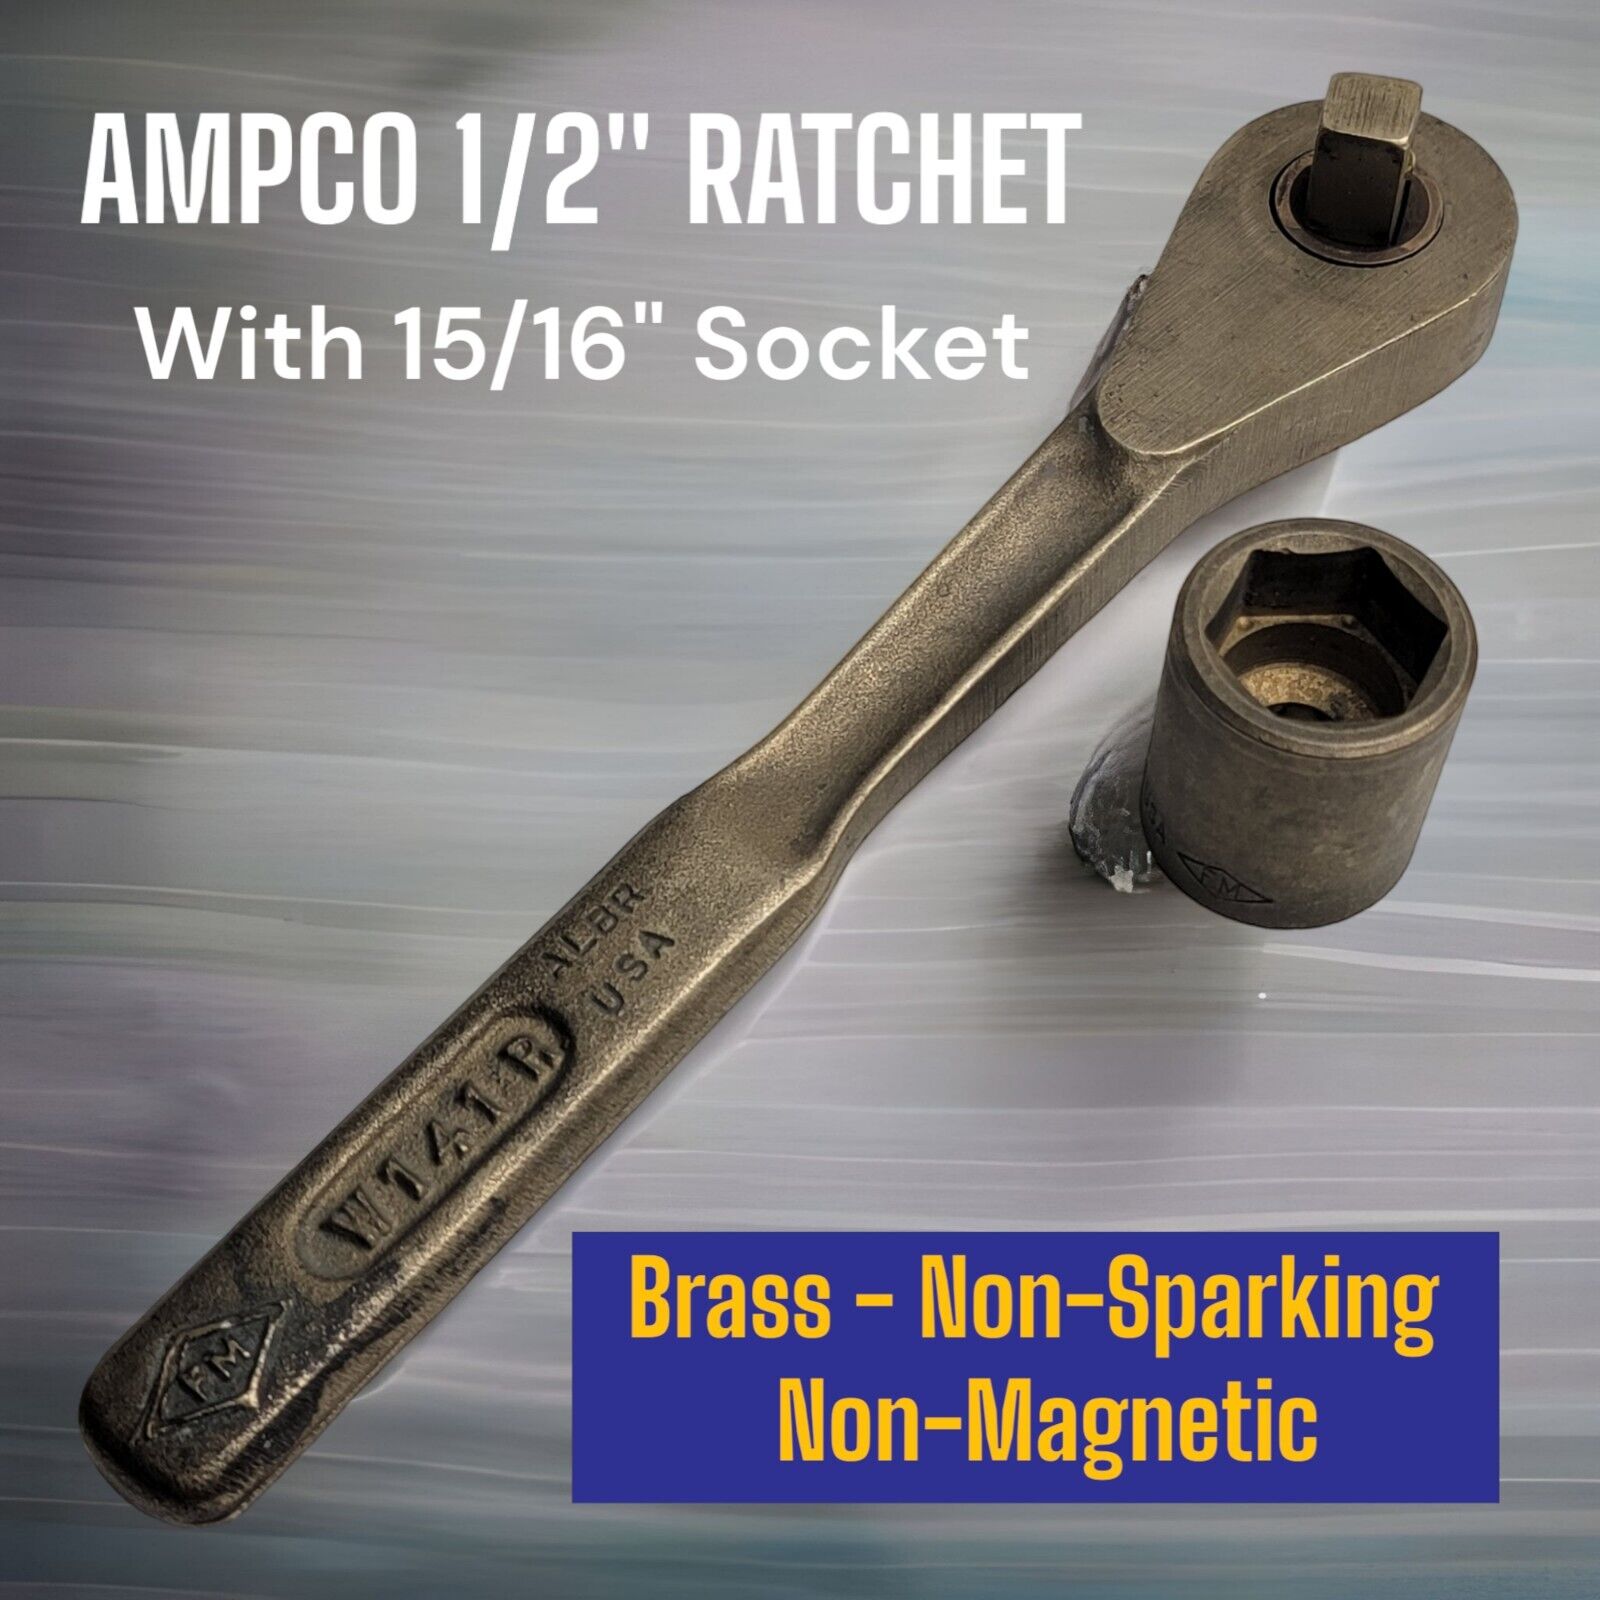 Ampco Non-Sparking Non-Magnetic !/2" Ratchet